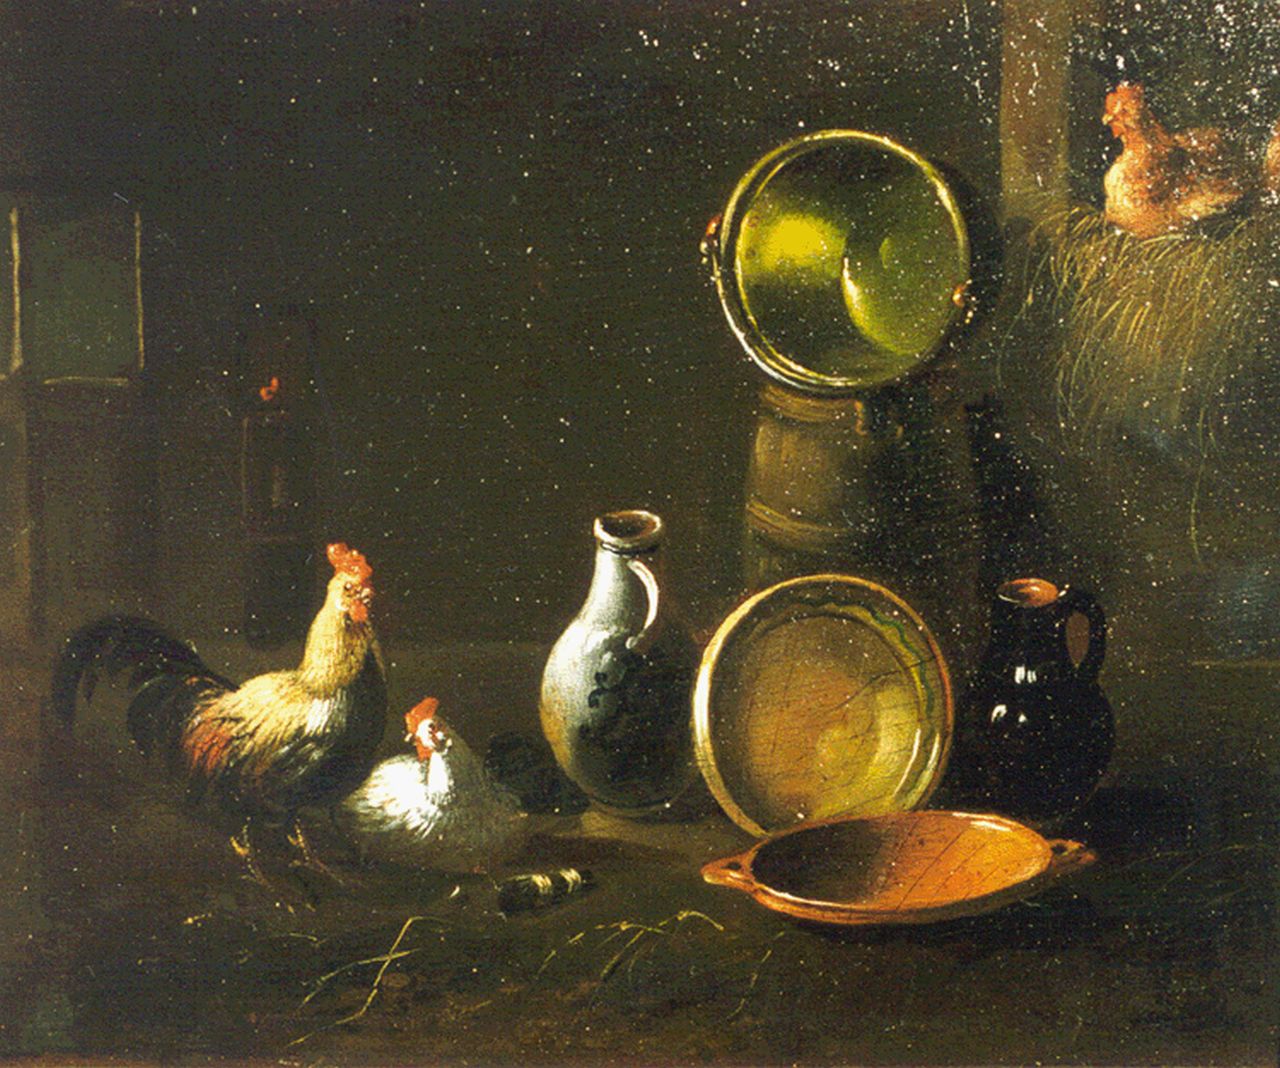 Verhoesen A.  | Albertus Verhoesen, Poultry in a stable, oil on panel 14.0 x 16.6 cm